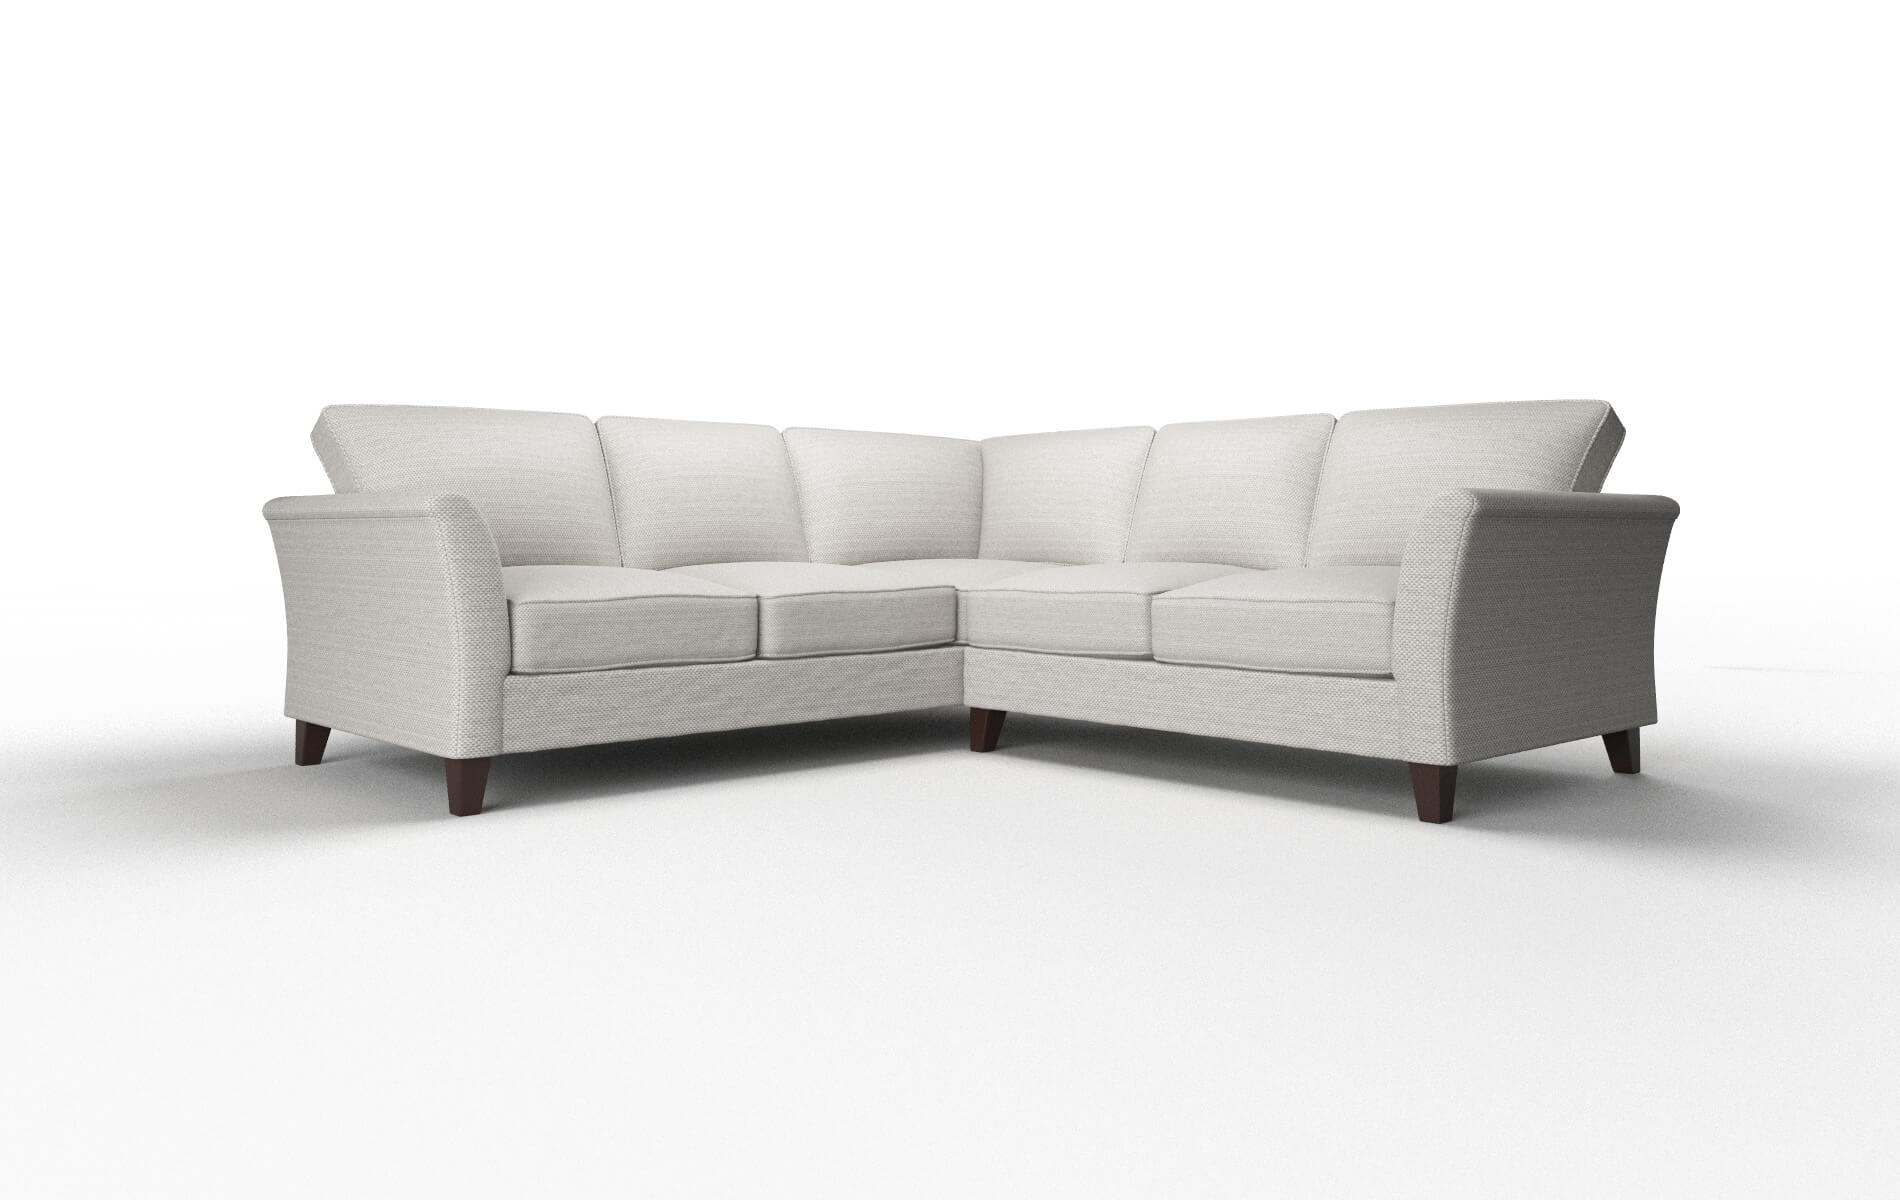 Cologne Avenger Dolphin Sectional espresso legs